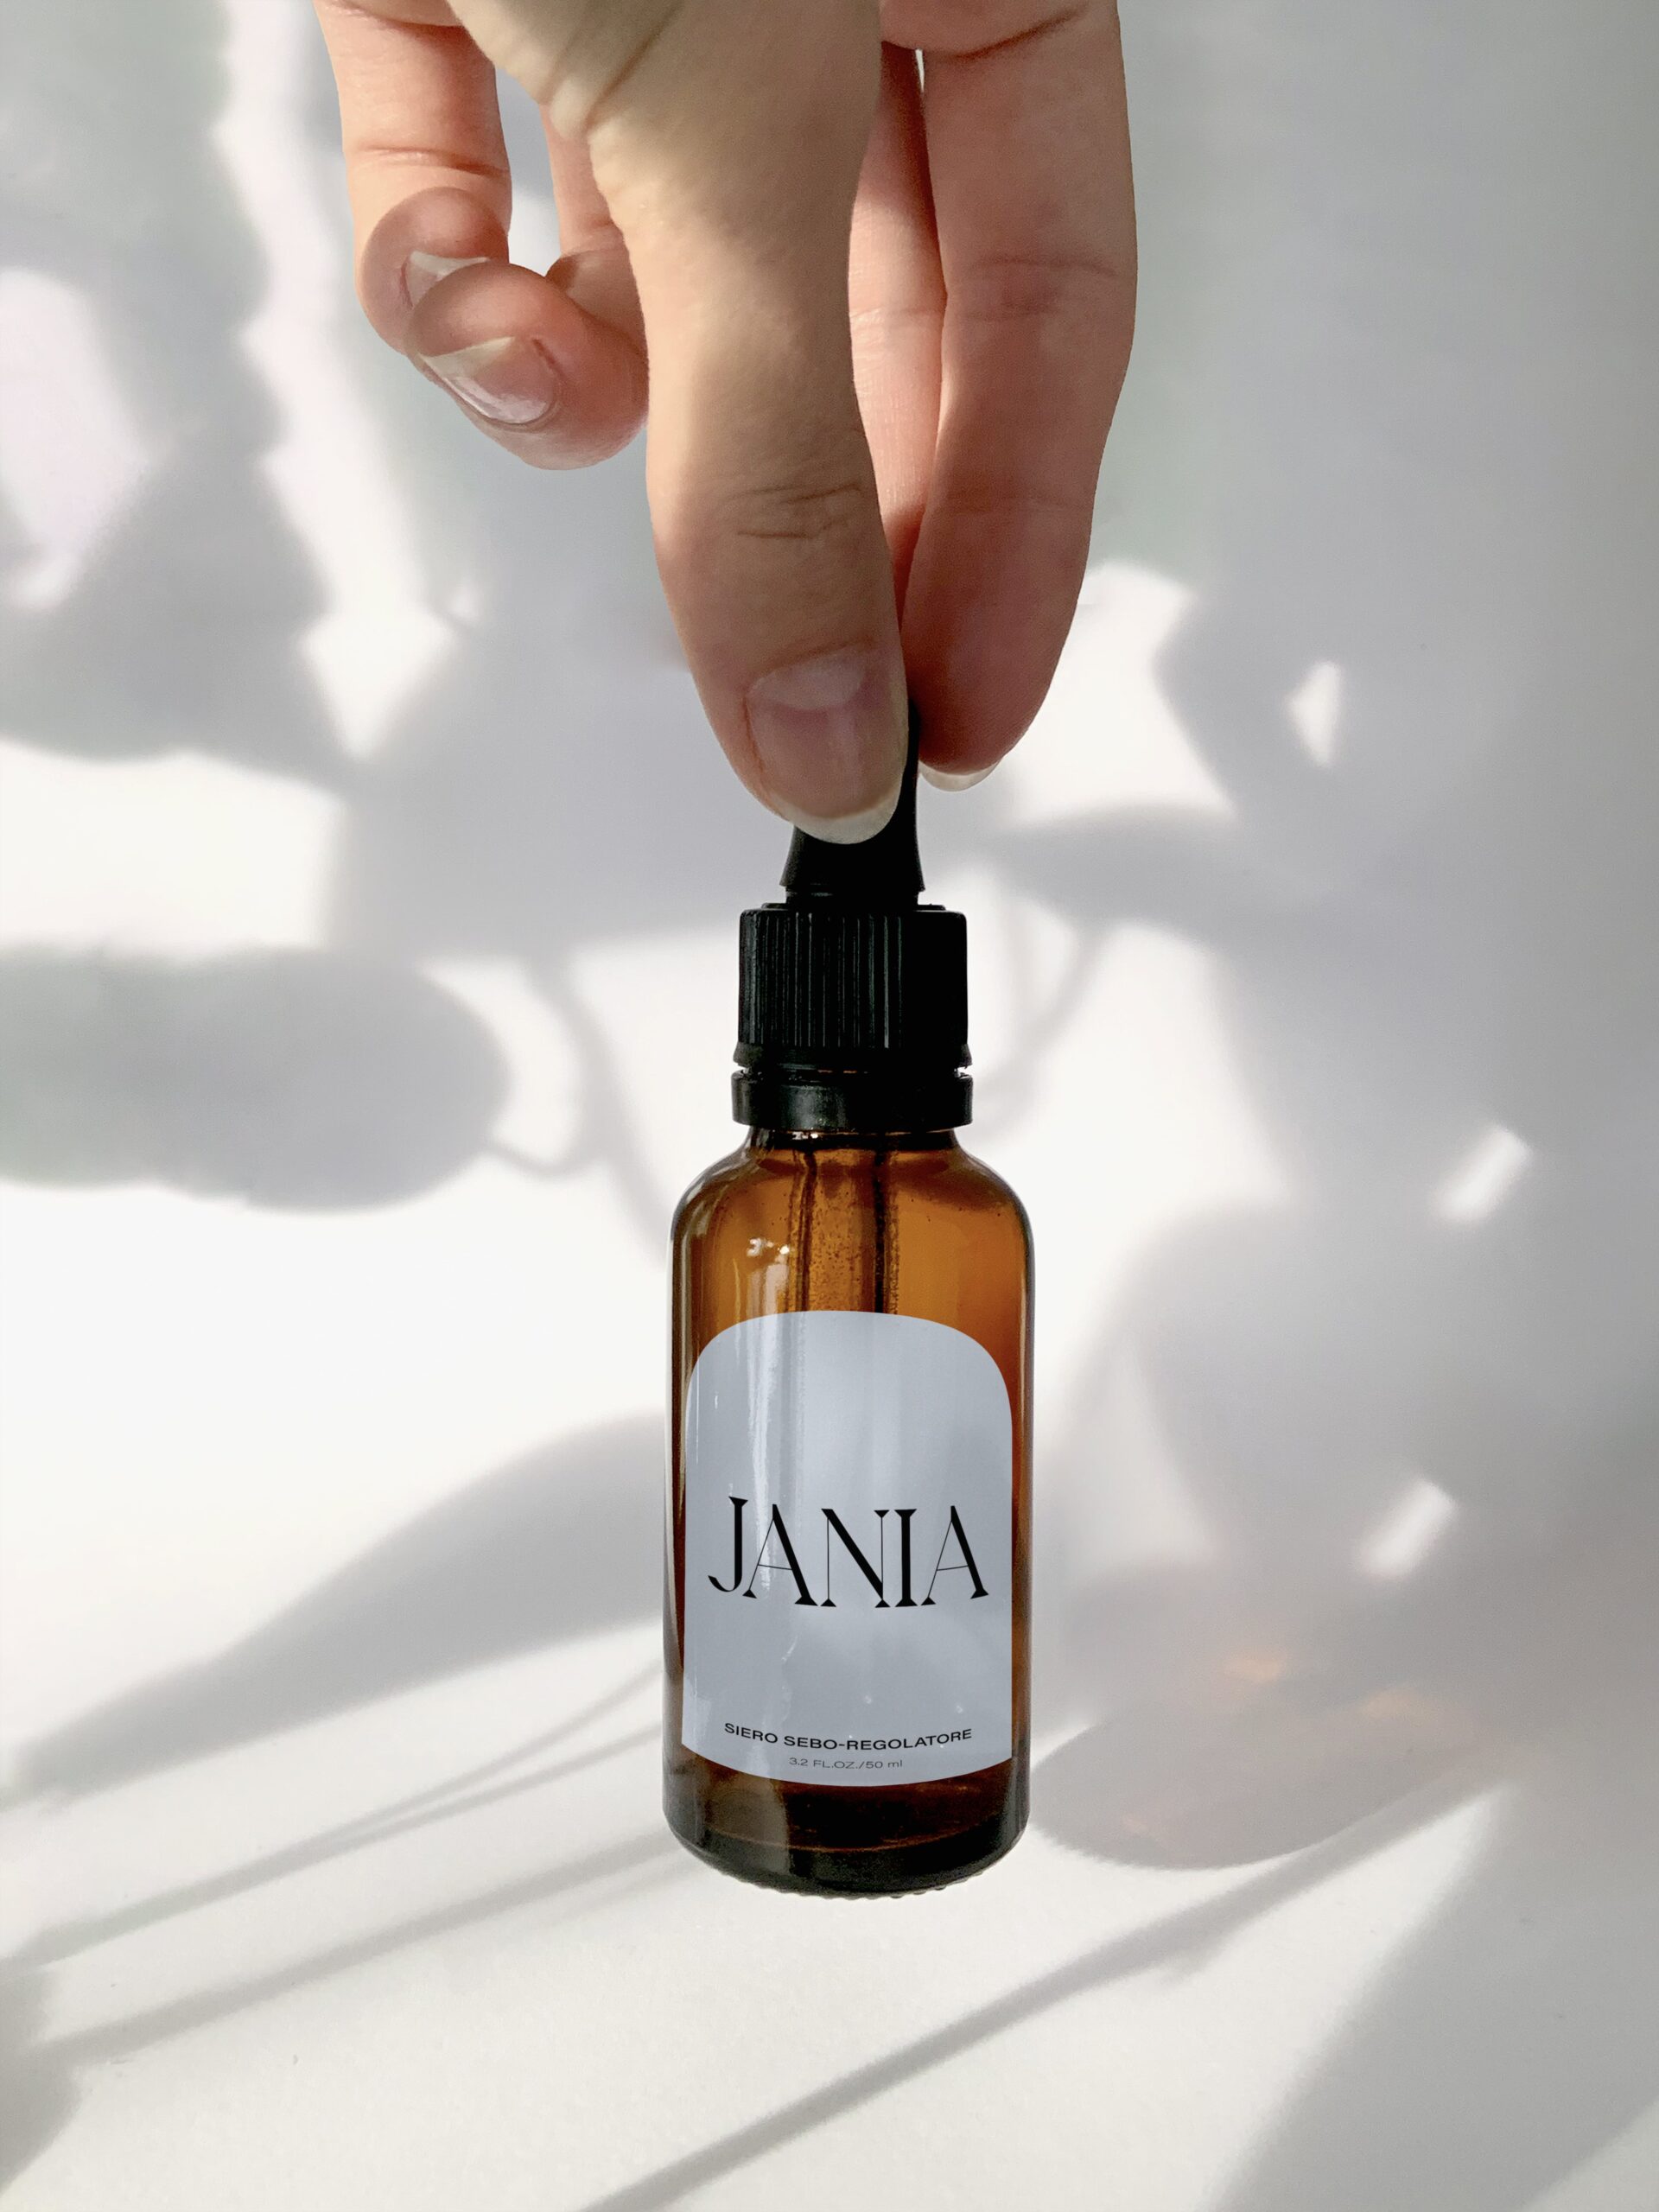 jania amber dropper bottle with hand